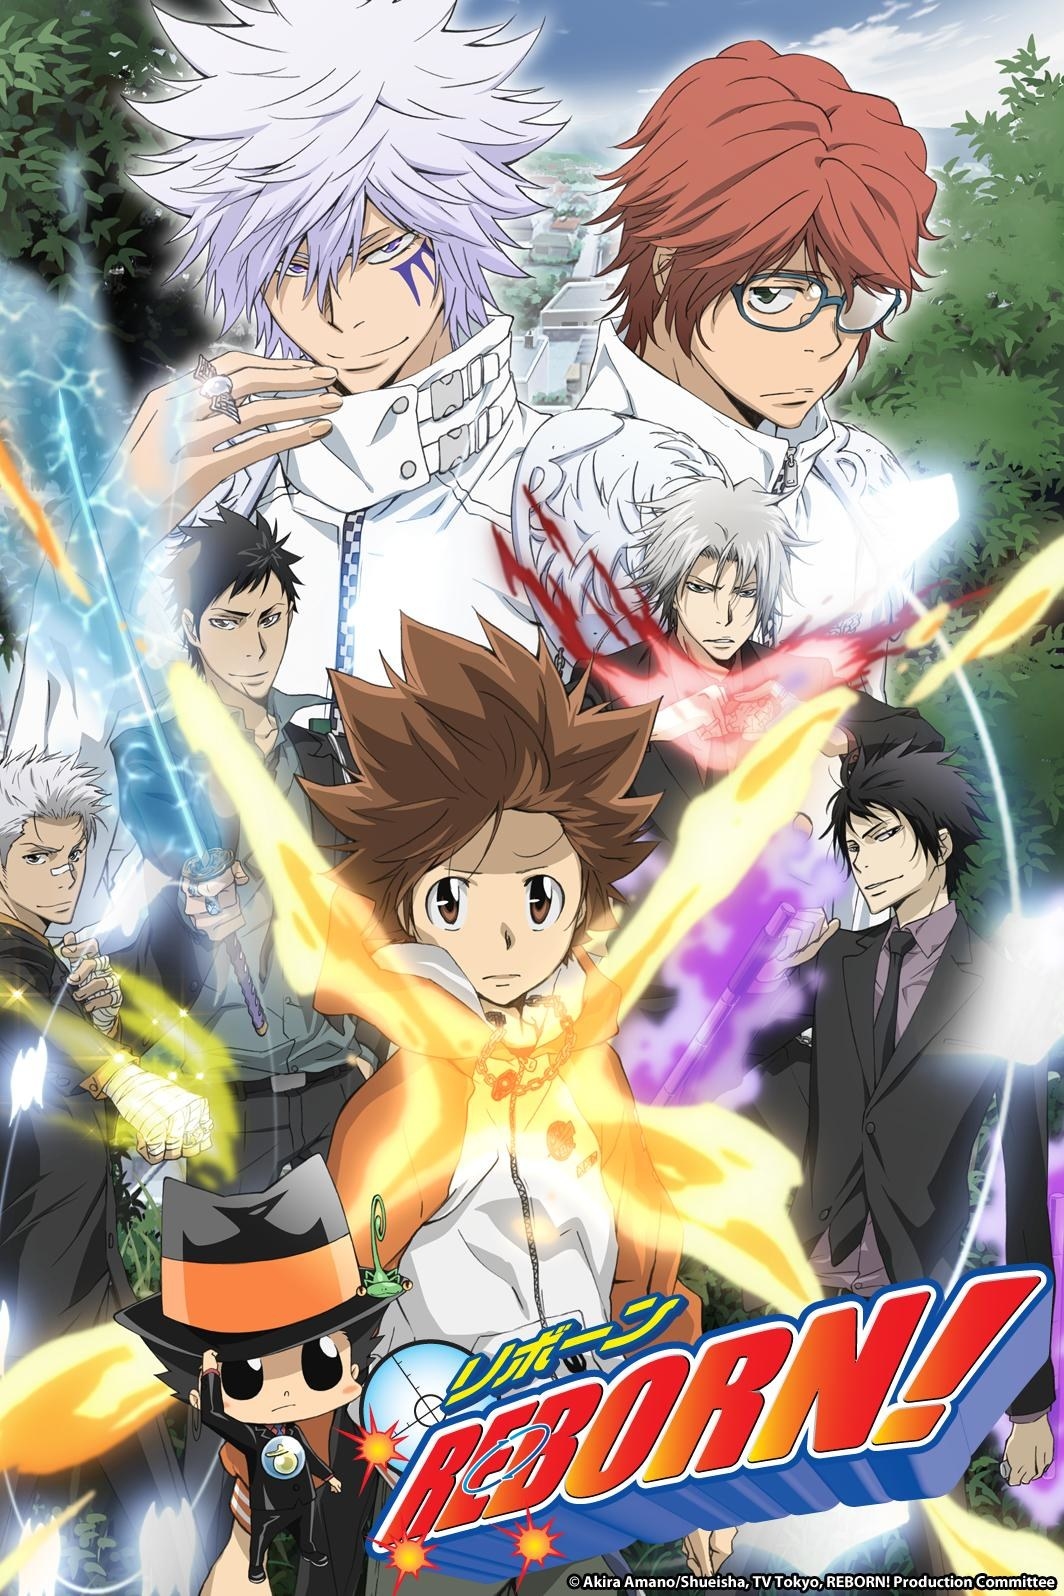 The poster for Katekyo Hitman REBORN with Tsuna Reborn Hayato Takeshi and others on the cover